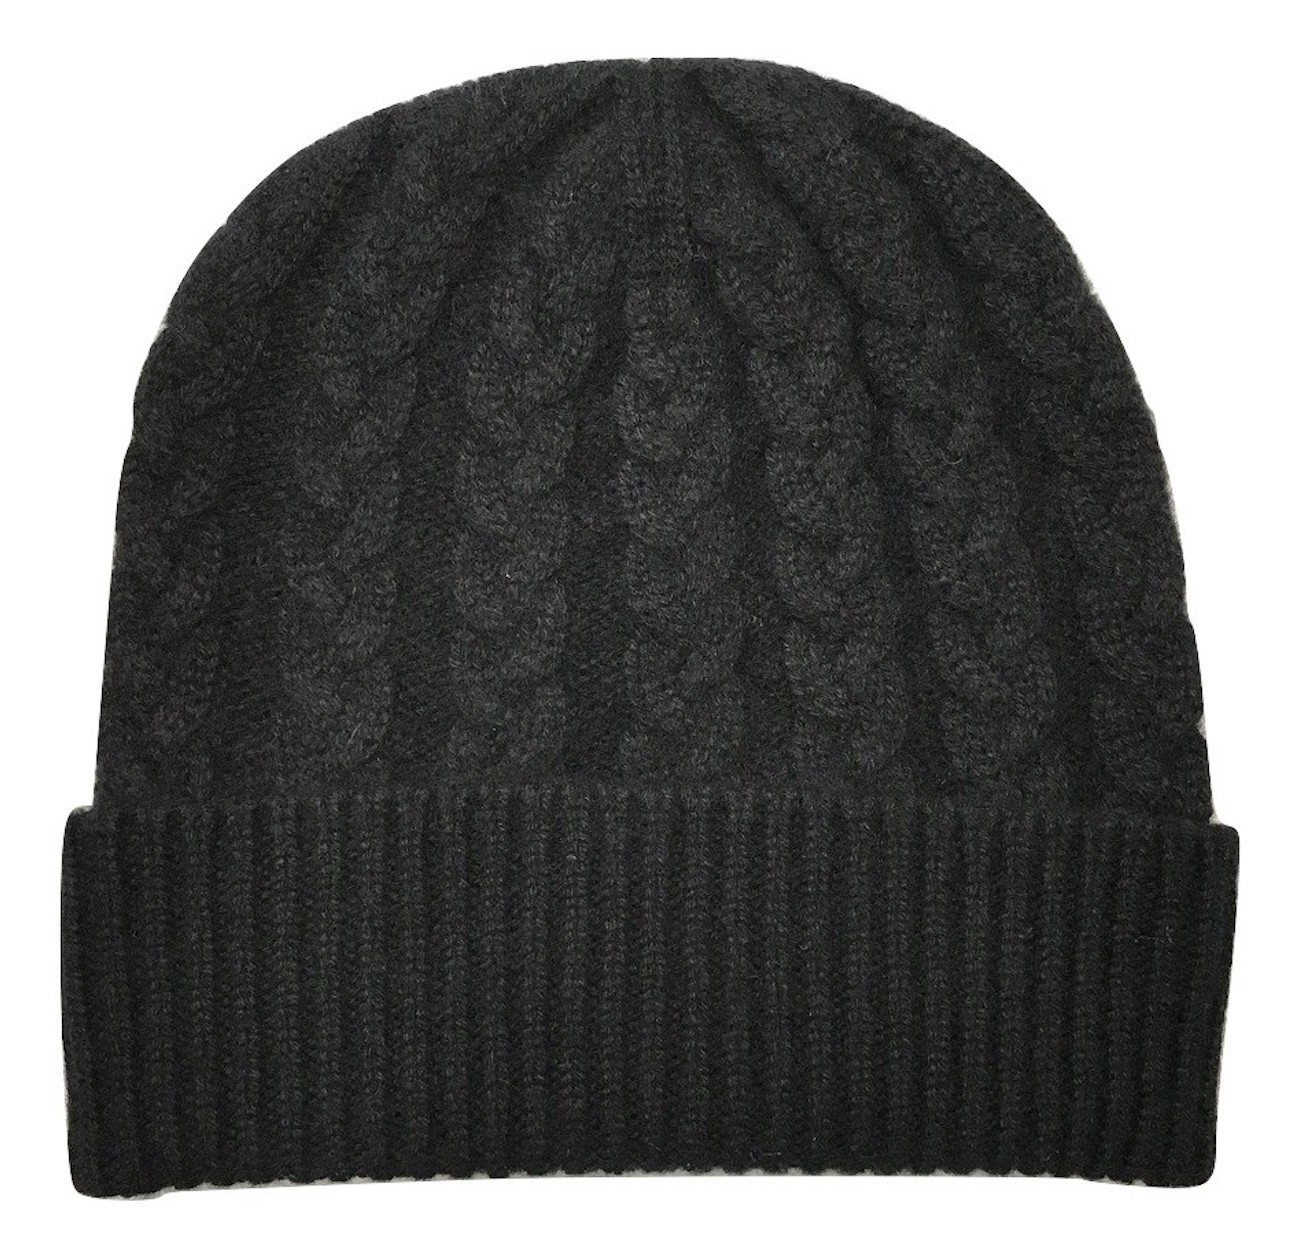 The Scarf Company Black Cashmere 3ply Cable Knit Beanie Hat